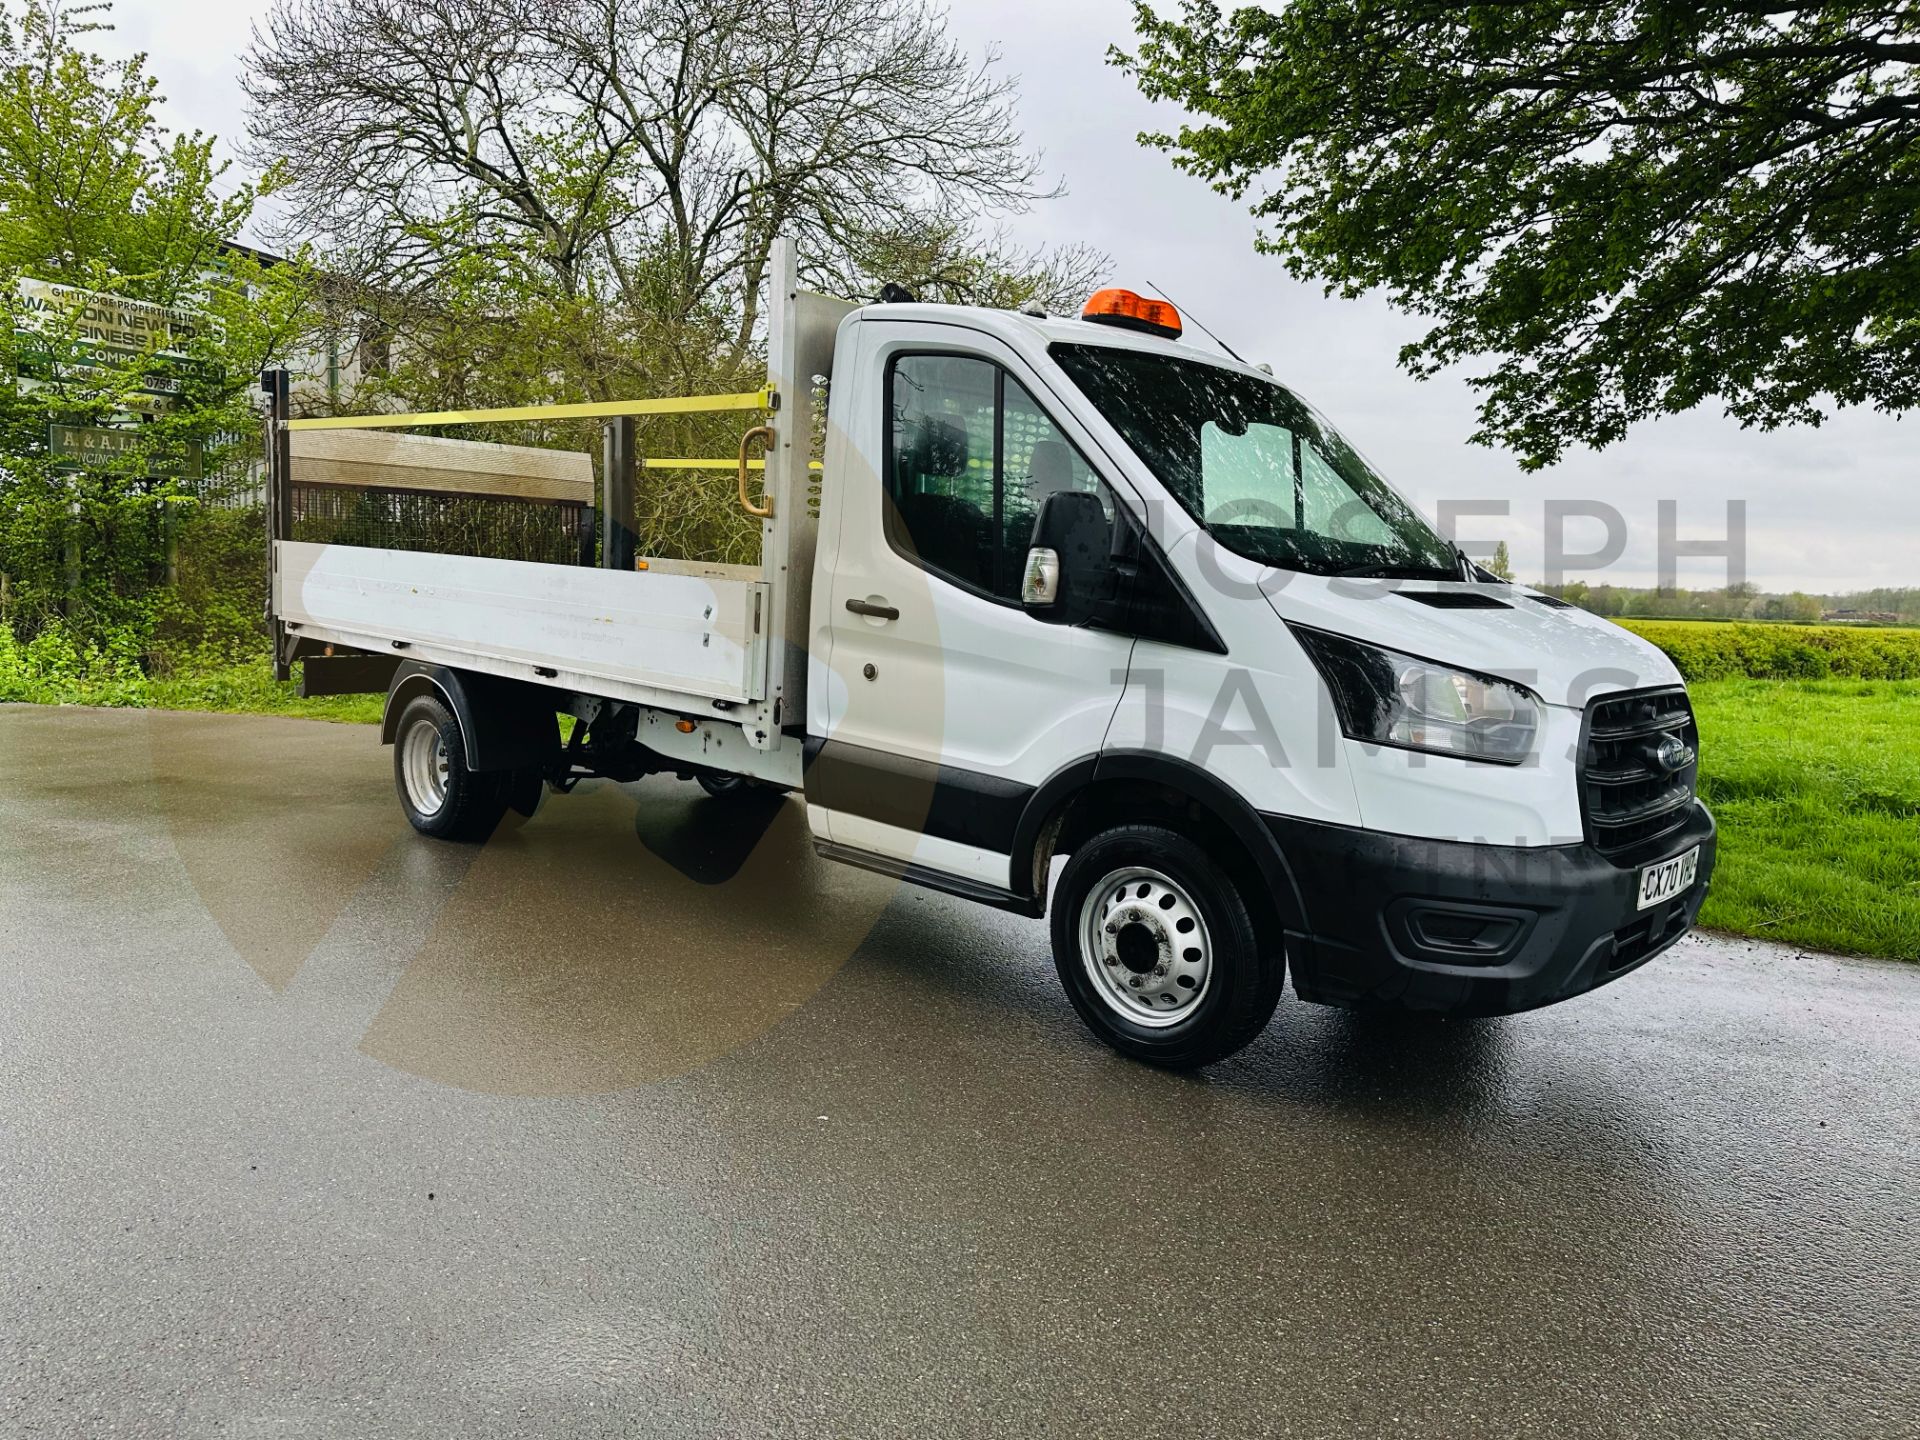 FORD TRANSIT 350 LEADER 2.0 TDCI ECOBLUE *DROPSIDE TRUCK W/ ELECTRIC TAILLIFT* - 2021 MODEL -EURO 6